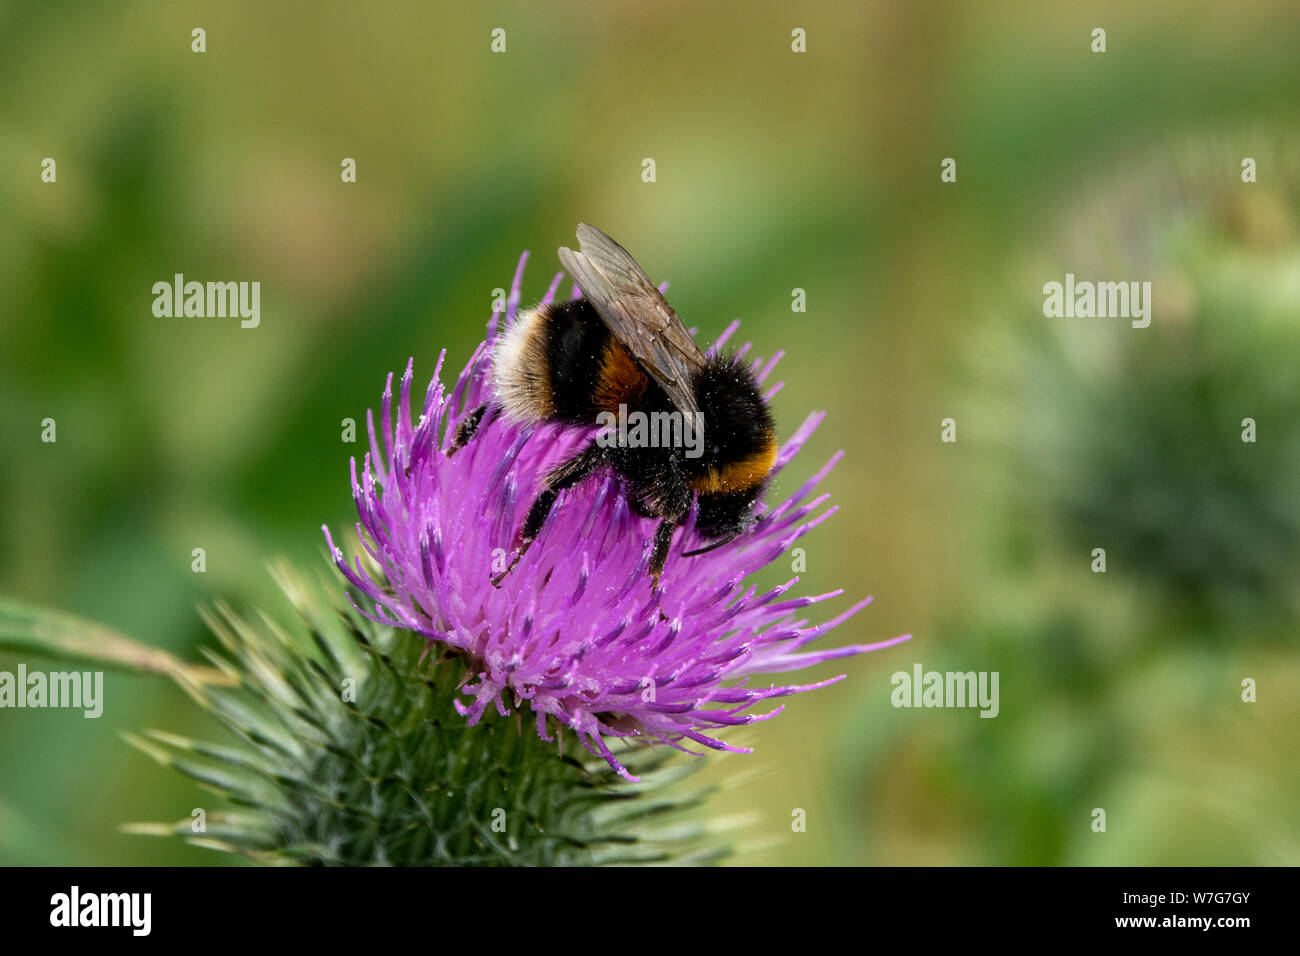 Close up of a bumblebee on a purple thistle bloom Stock Photo